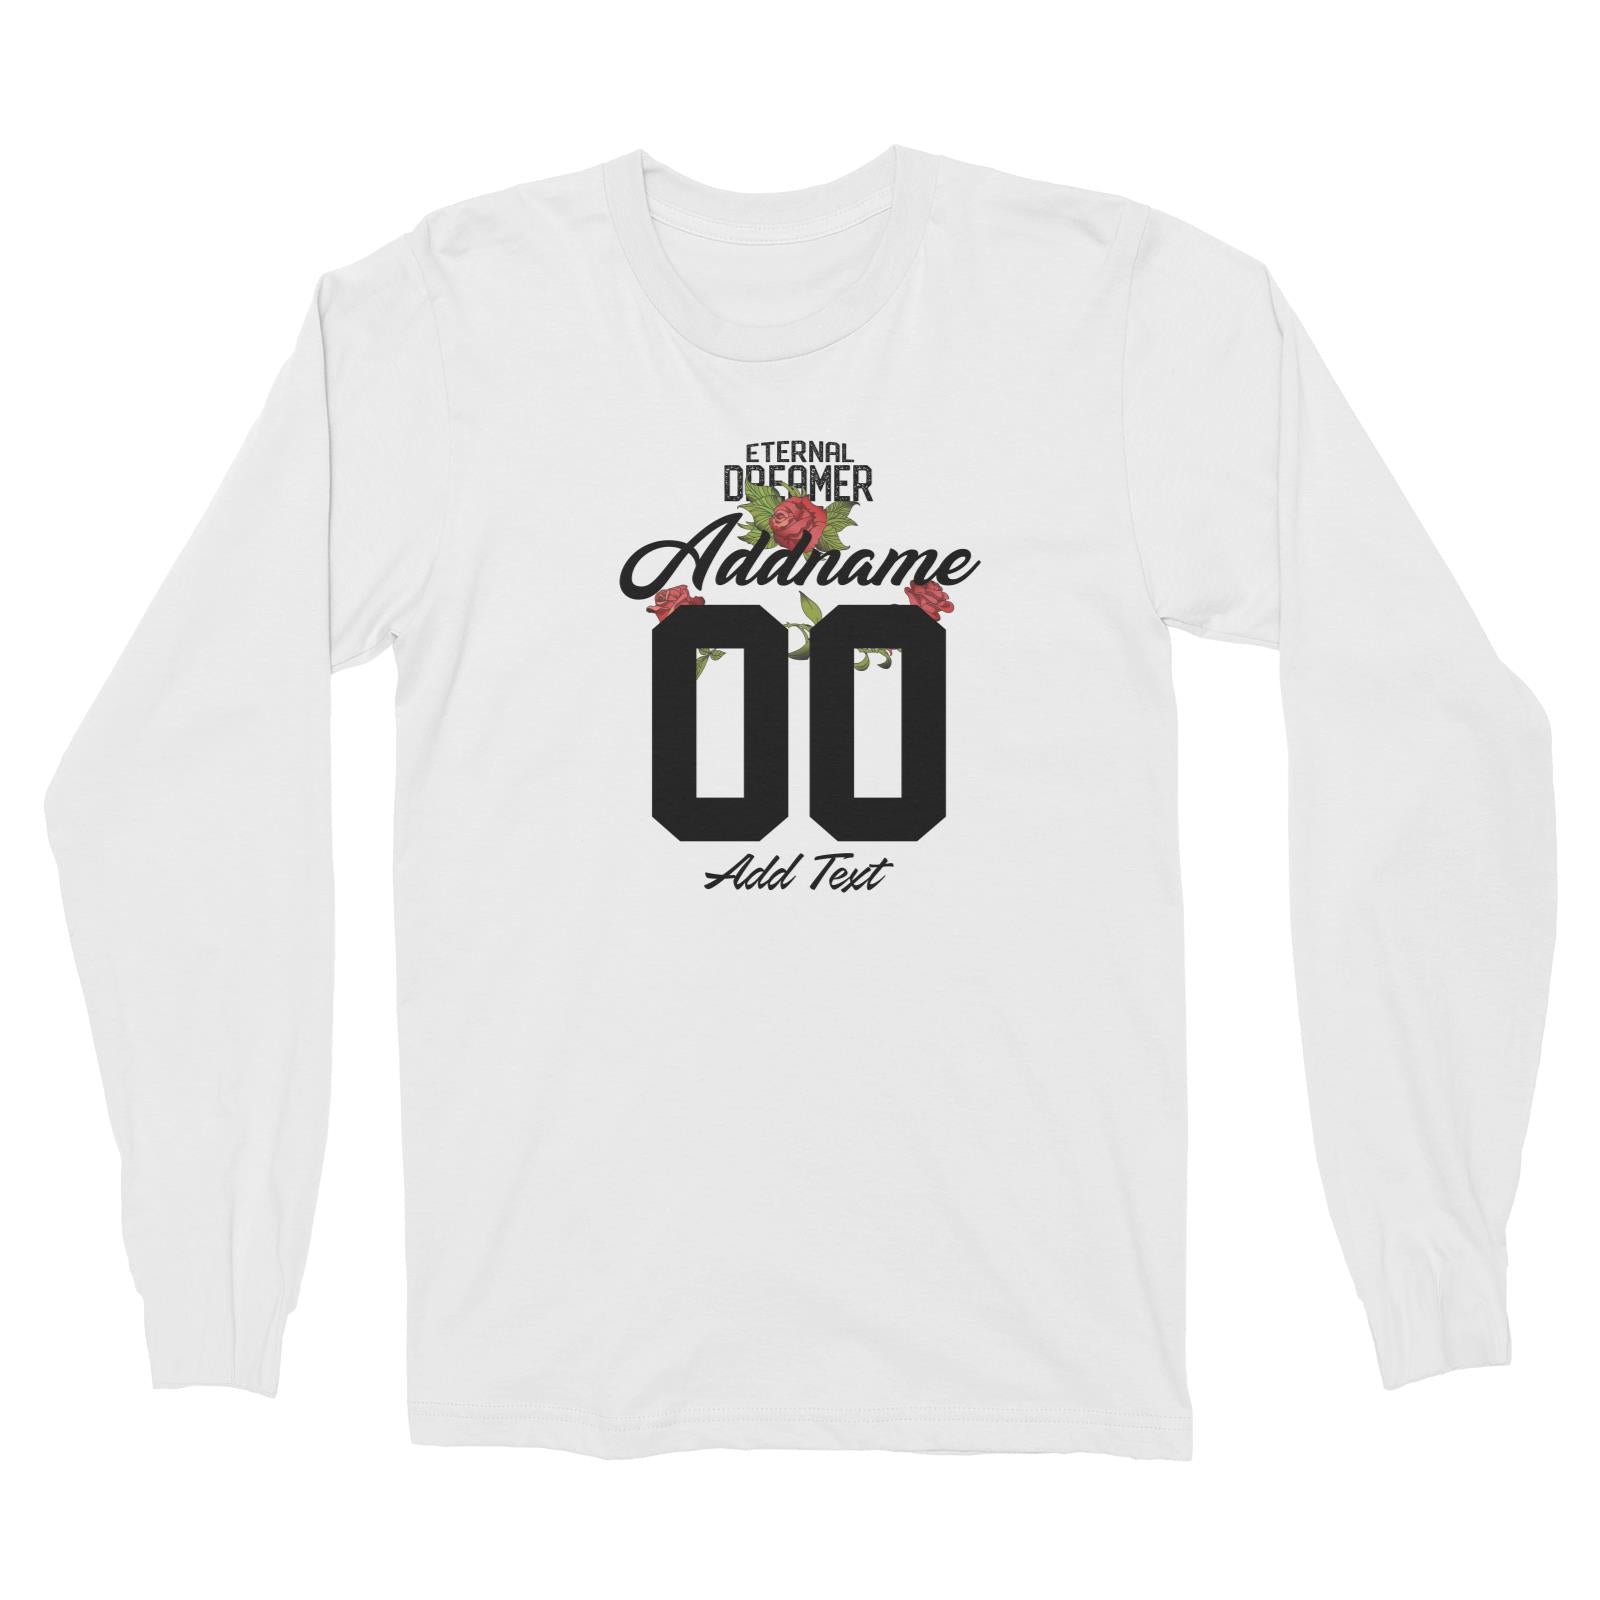 Eternal Dreamer with Roses Personalizable with Name Number and Text Long Sleeve Unisex T-Shirt